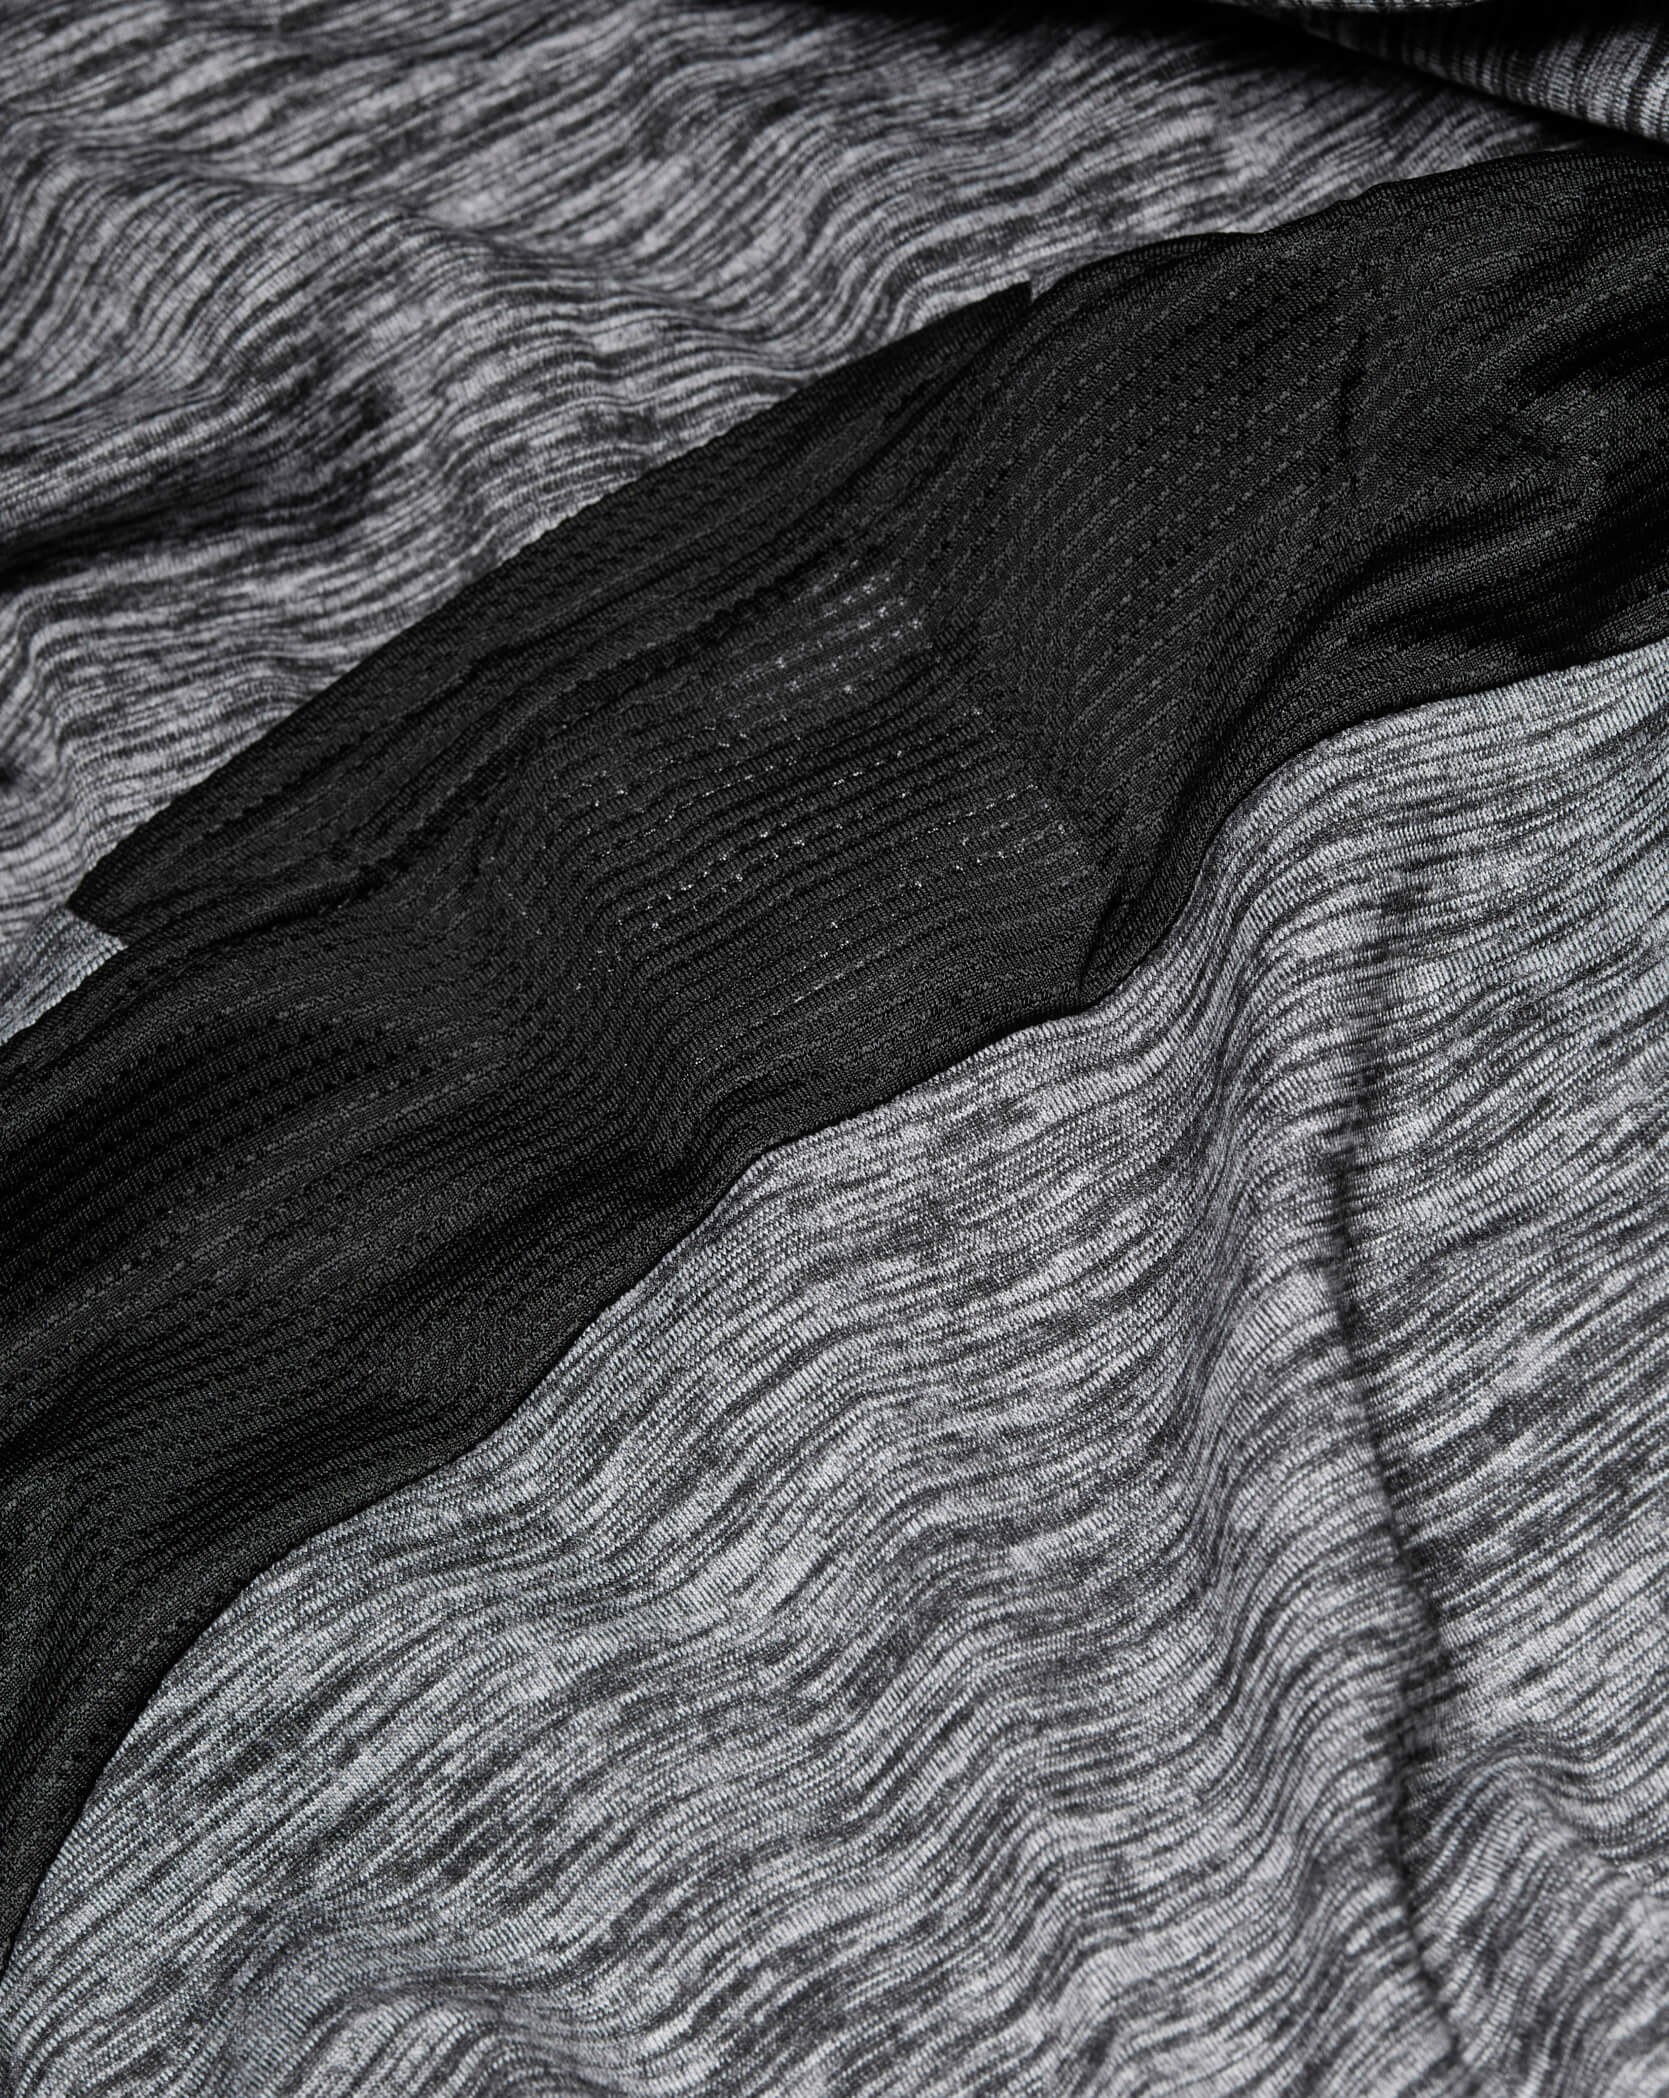 Grey and black Twinzz long sleeve active tee mesh